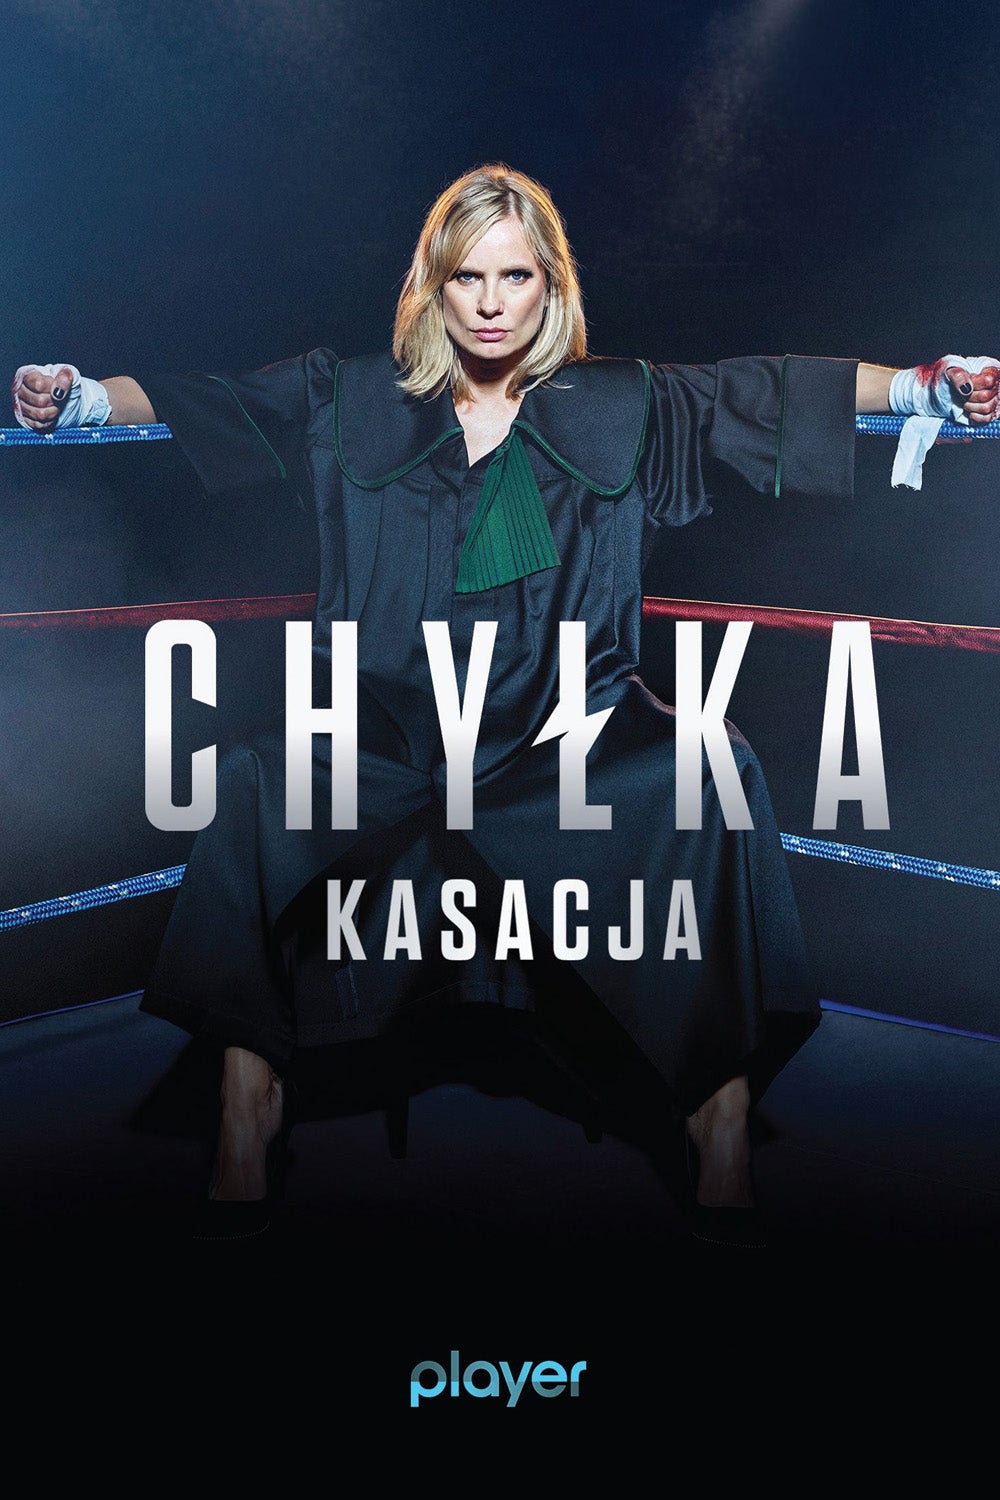 TV ratings for The Disappearance (Chylka) in Russia. Player.pl TV series